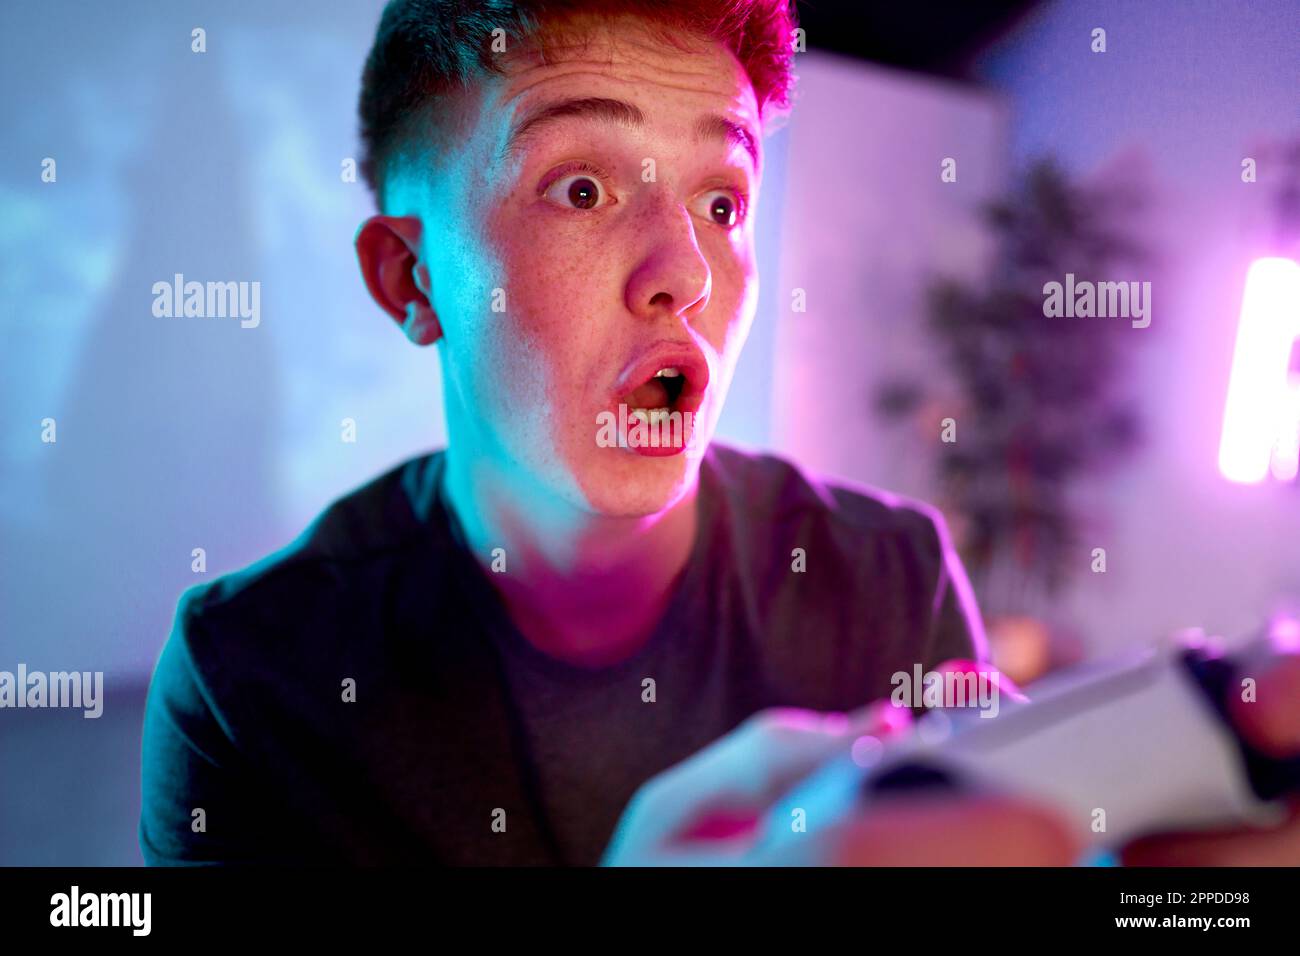 Man with facial expression playing leisure game at home Stock Photo